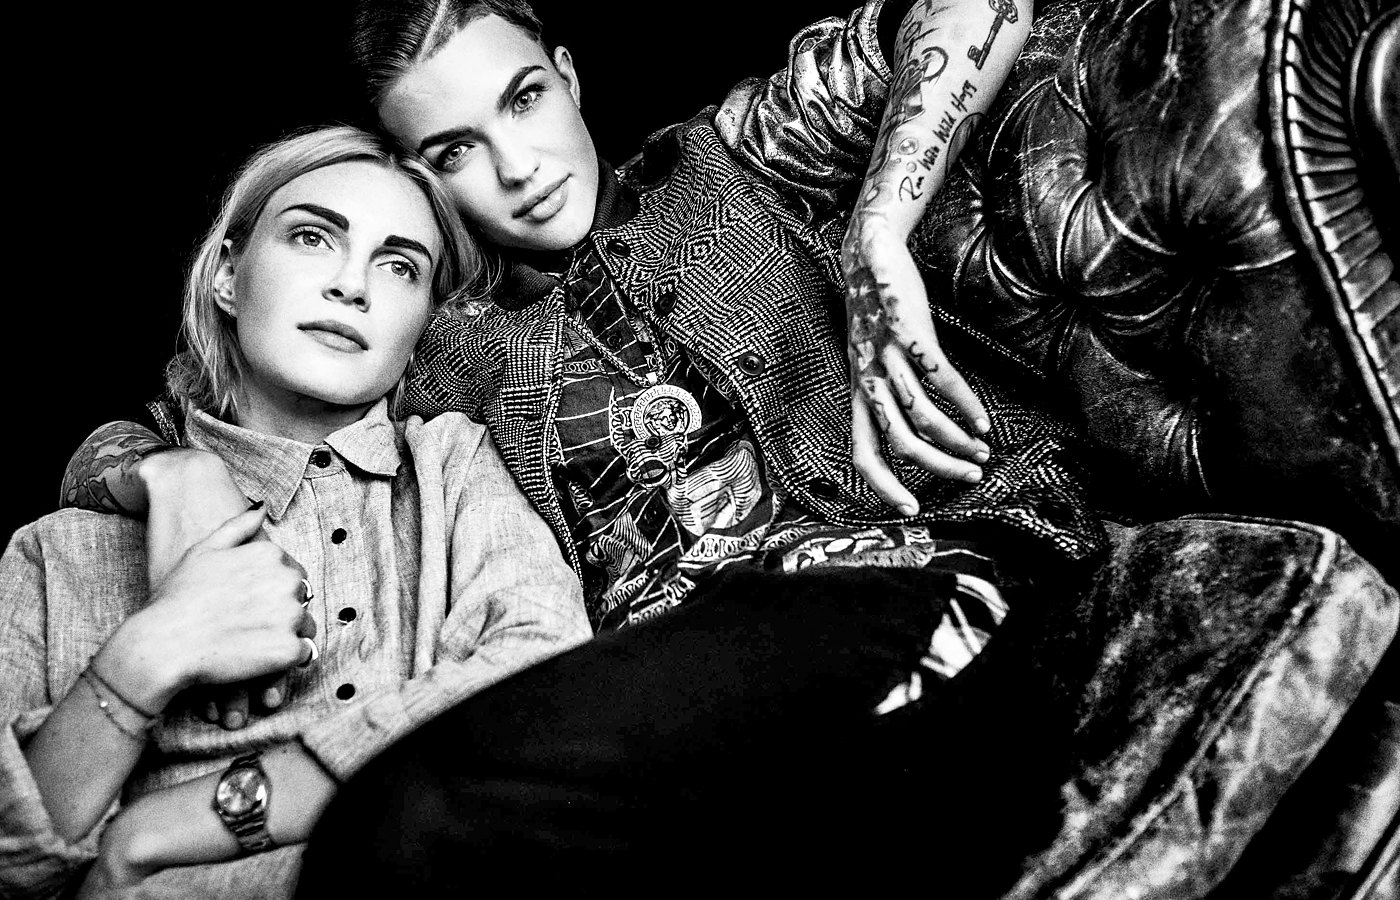 Ruby Rose and Phoebe Dahl